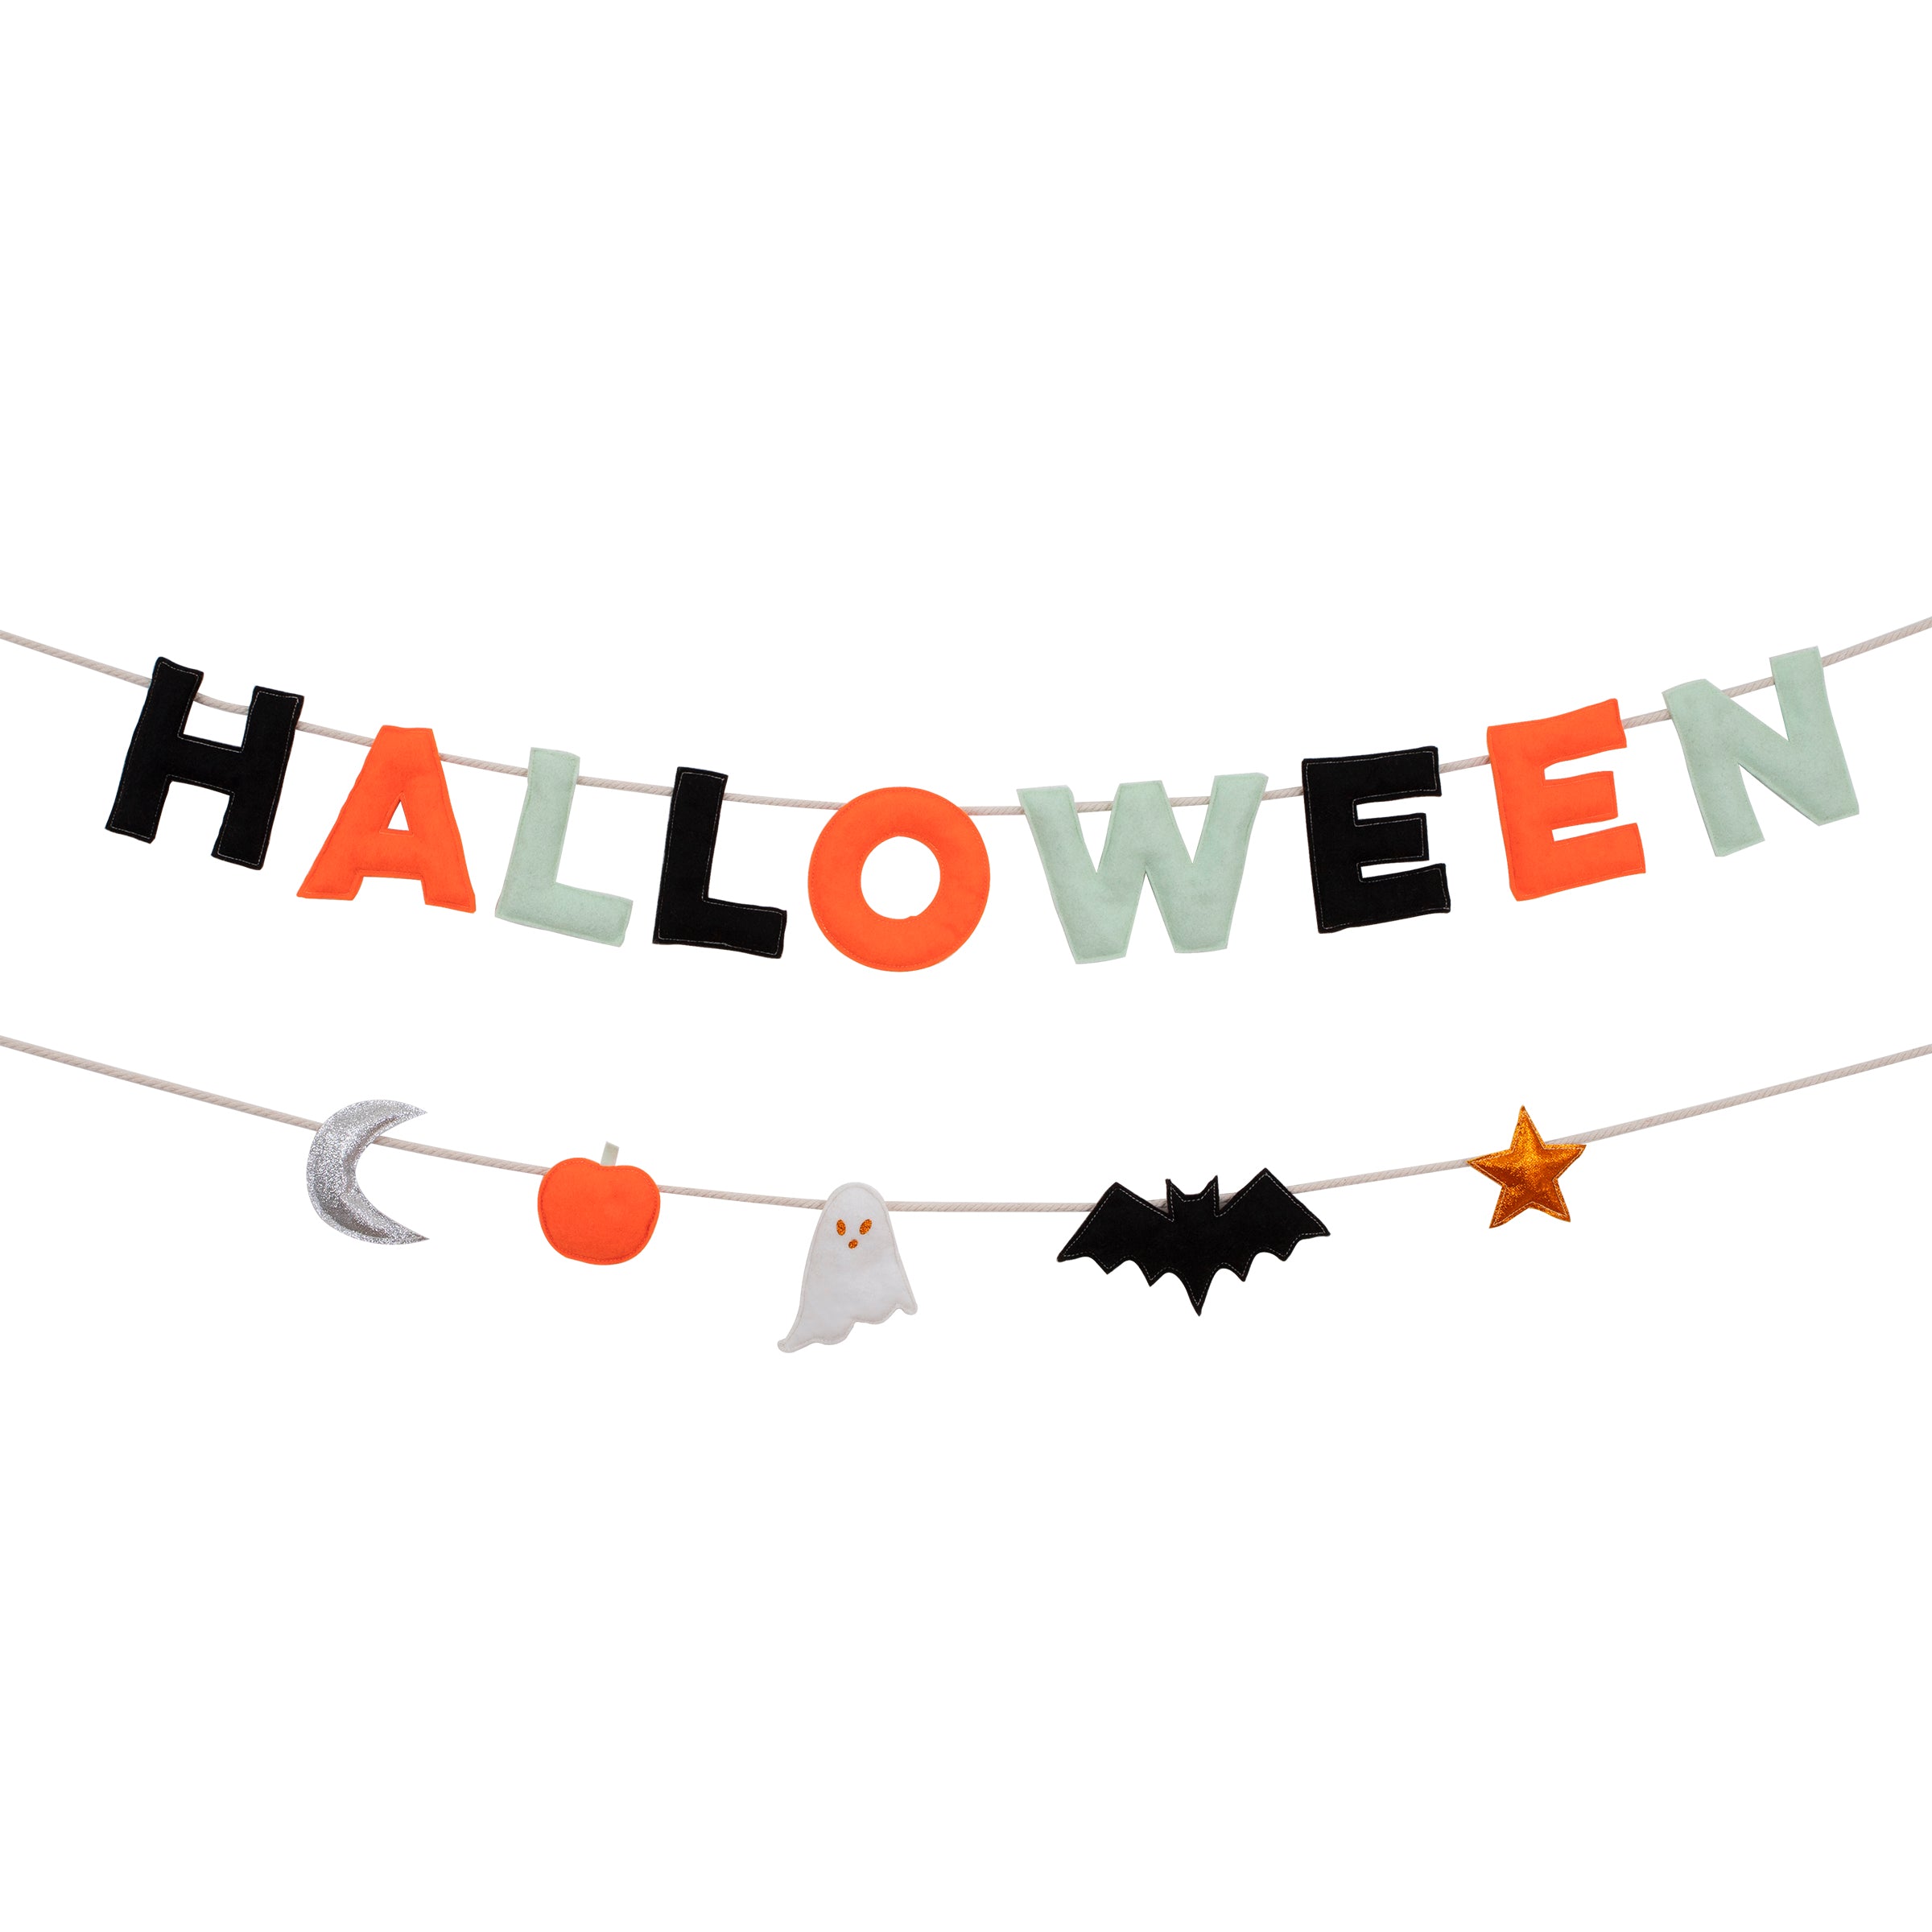 This indoor Halloween decoration is a garland crafted from felt and glittery fabric.